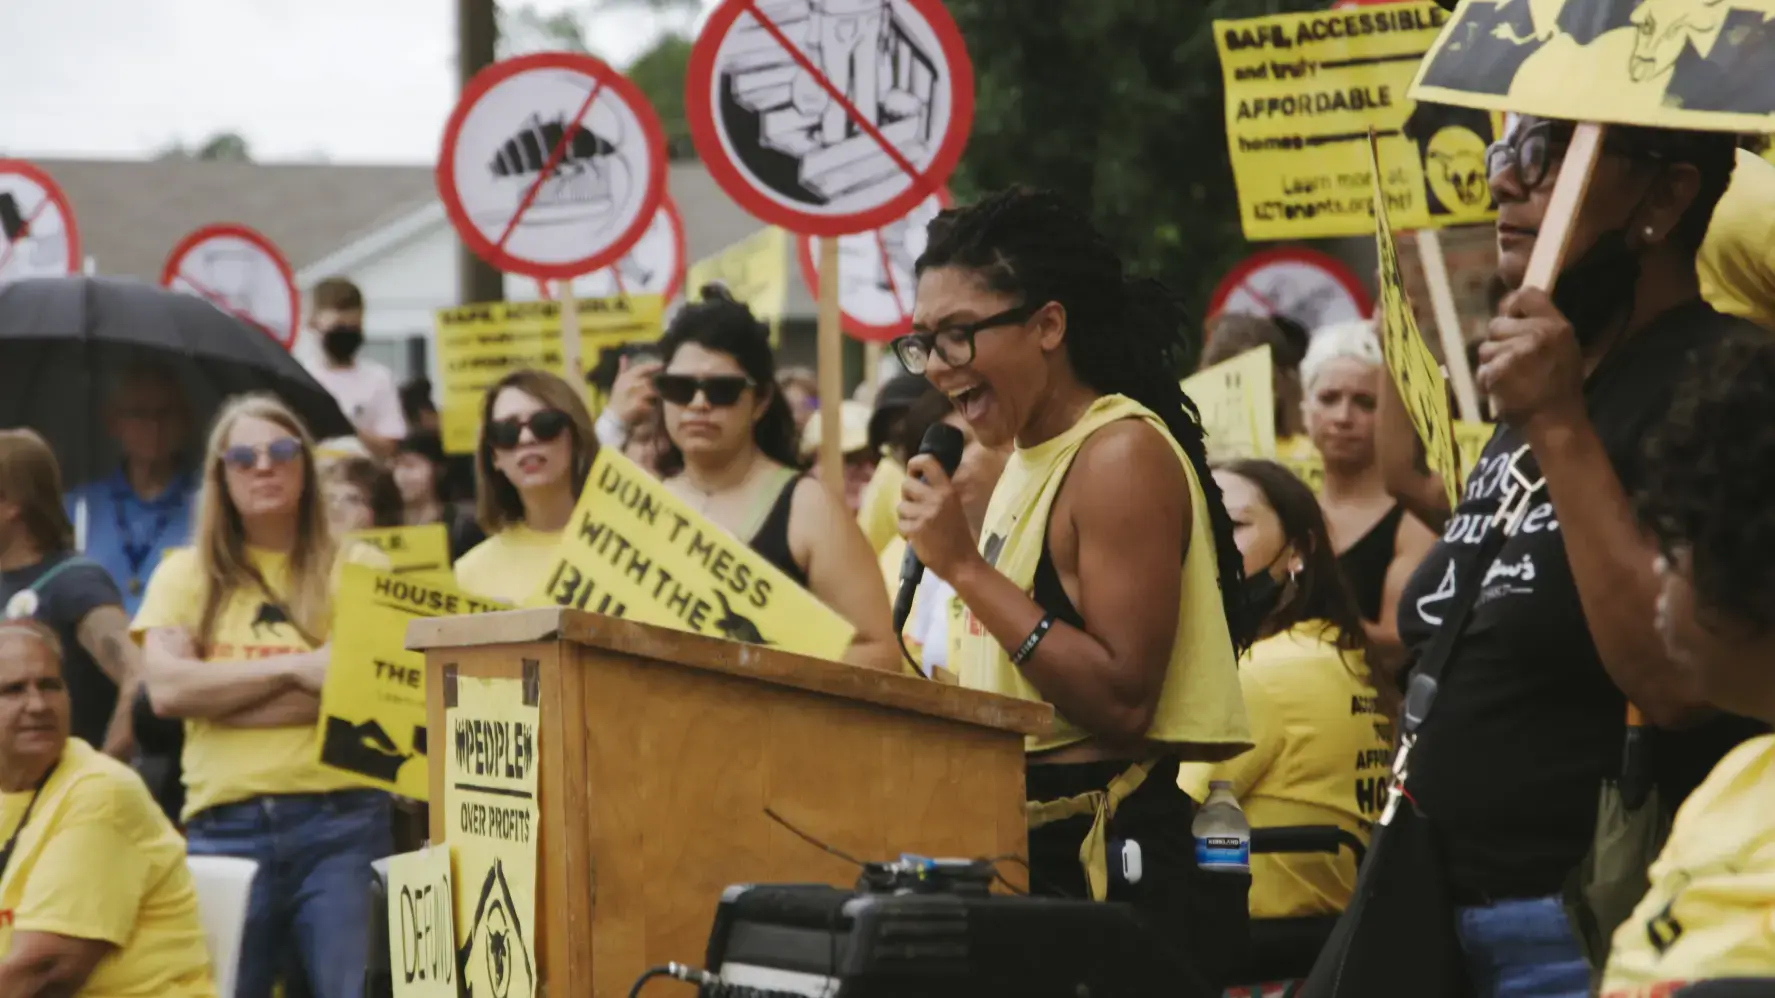 A woman in yellow speaks at a podium at a protest, surrounded by other protestors. The protestors are carrying yellow signs that say 